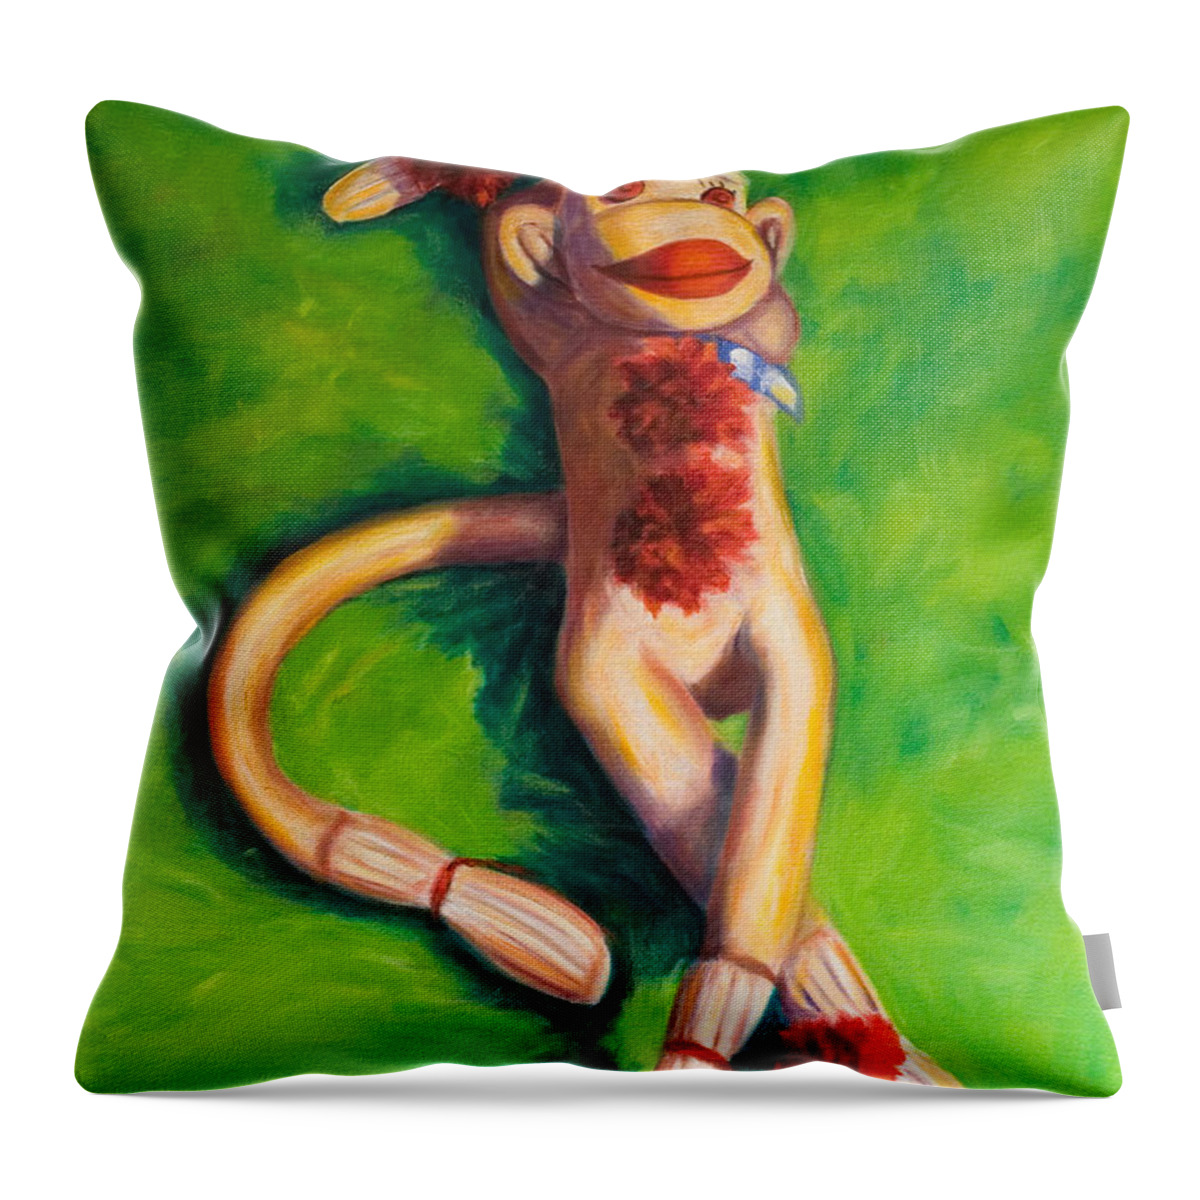 Sock Monkey Throw Pillow featuring the painting Life Is Good Sock Monkey by Shannon Grissom